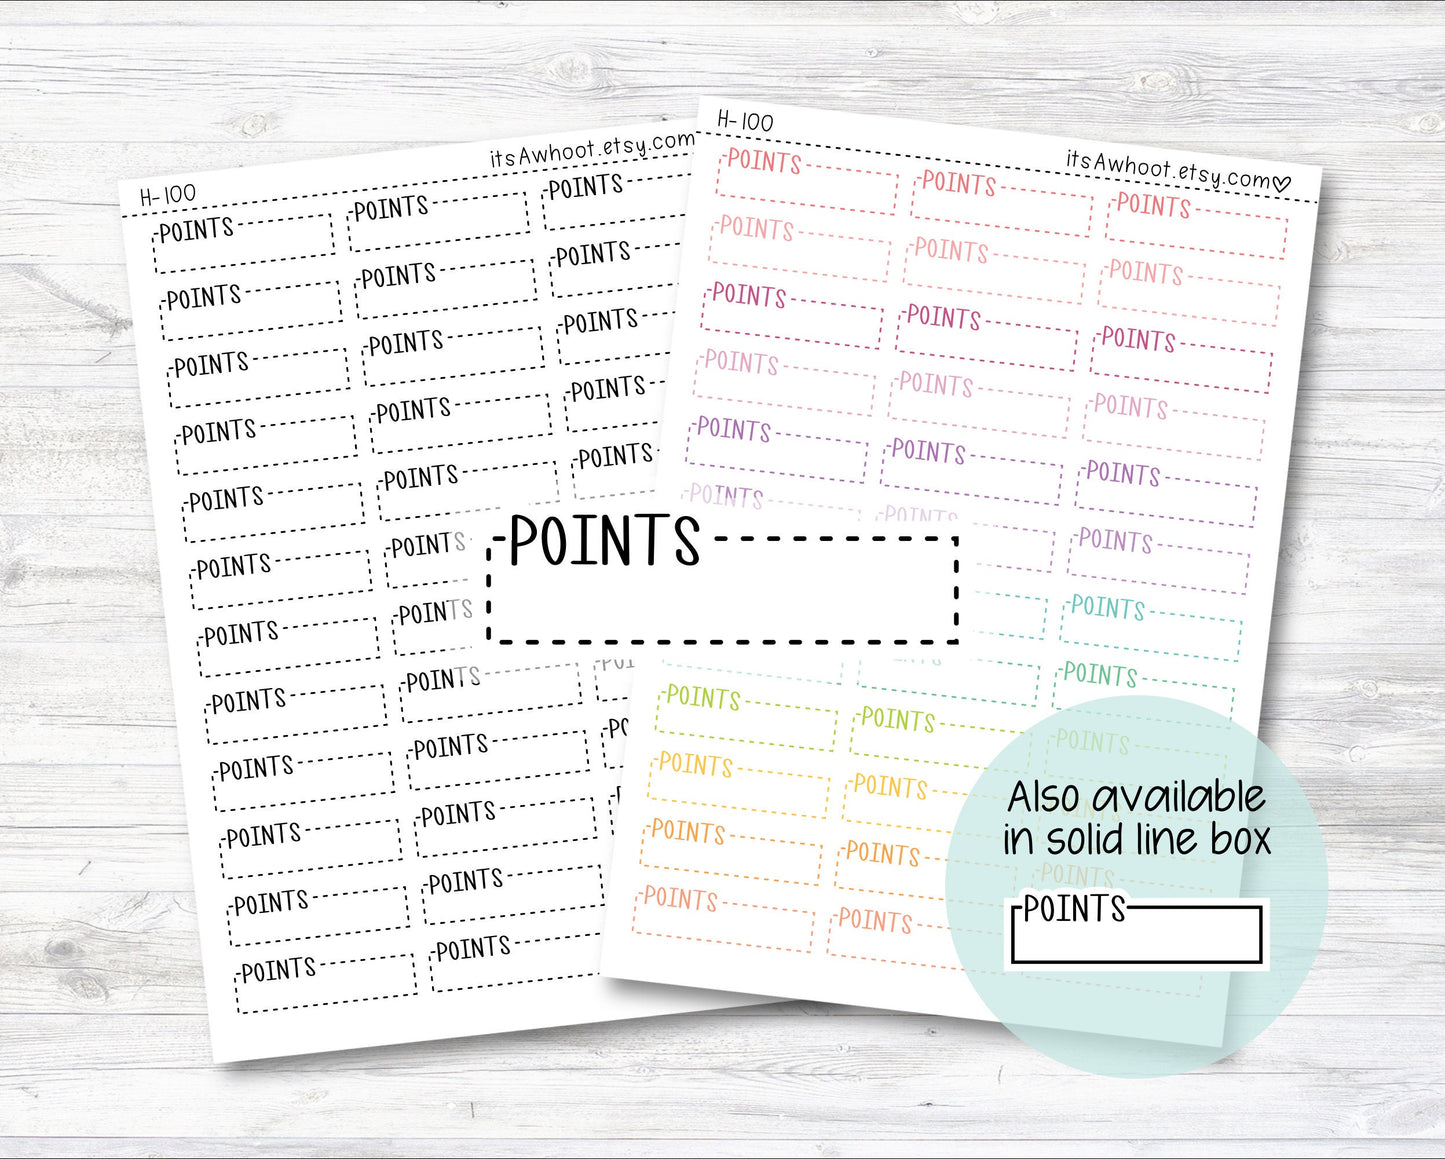 Points Quarter Box Label Planner Stickers - Dash or Solid (H100)